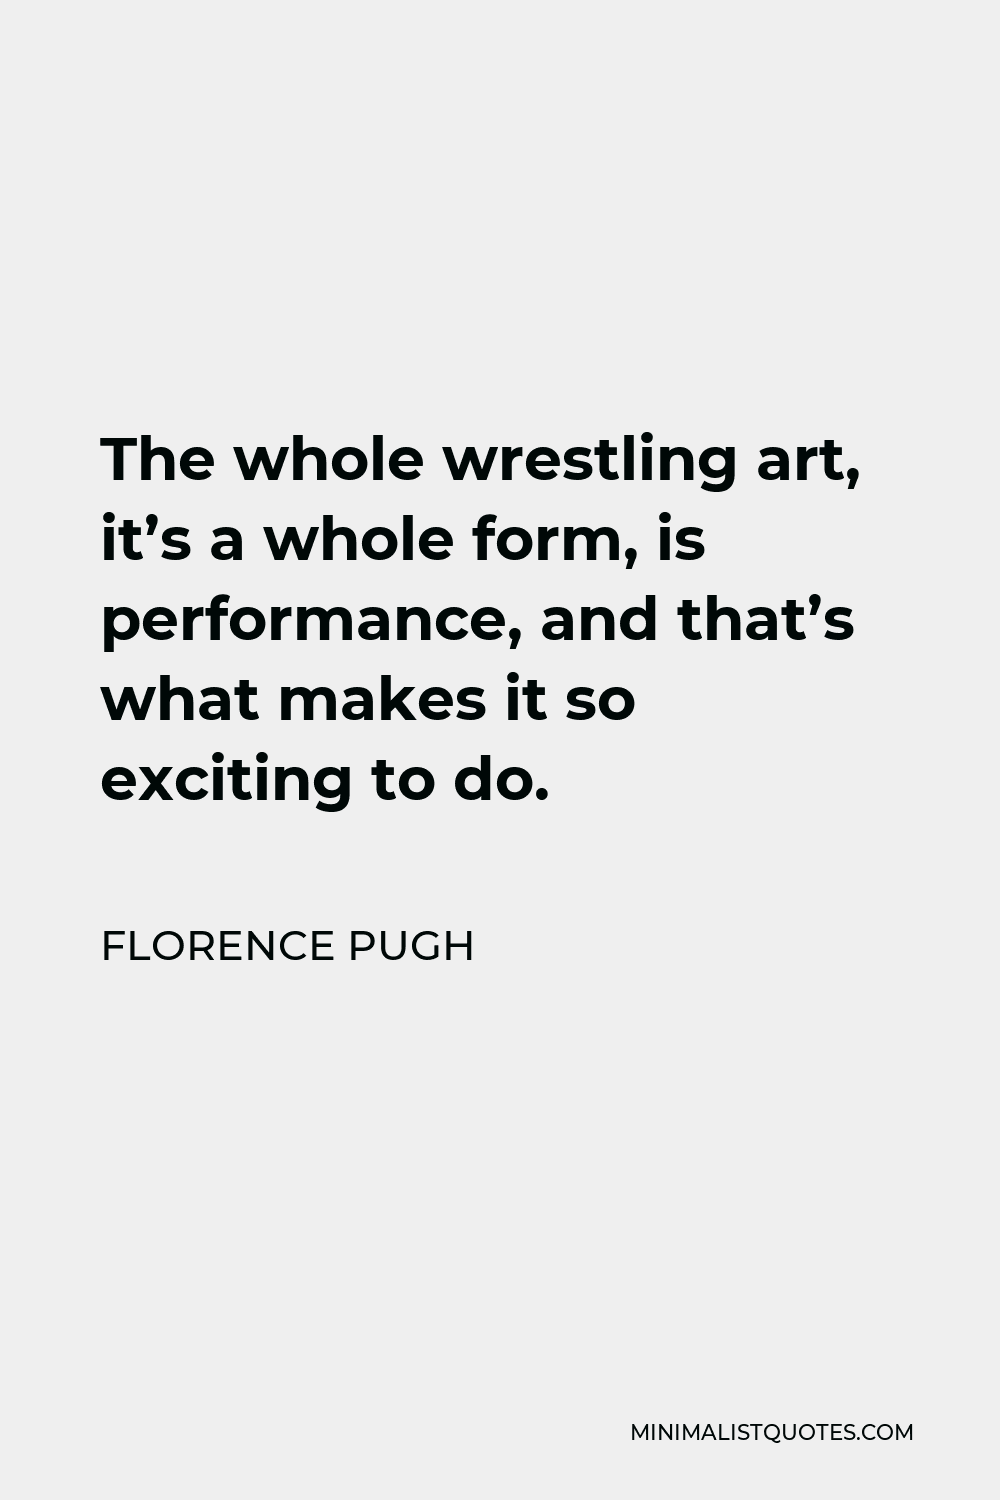 Florence Pugh Quote - The whole wrestling art, it’s a whole form, is performance, and that’s what makes it so exciting to do.